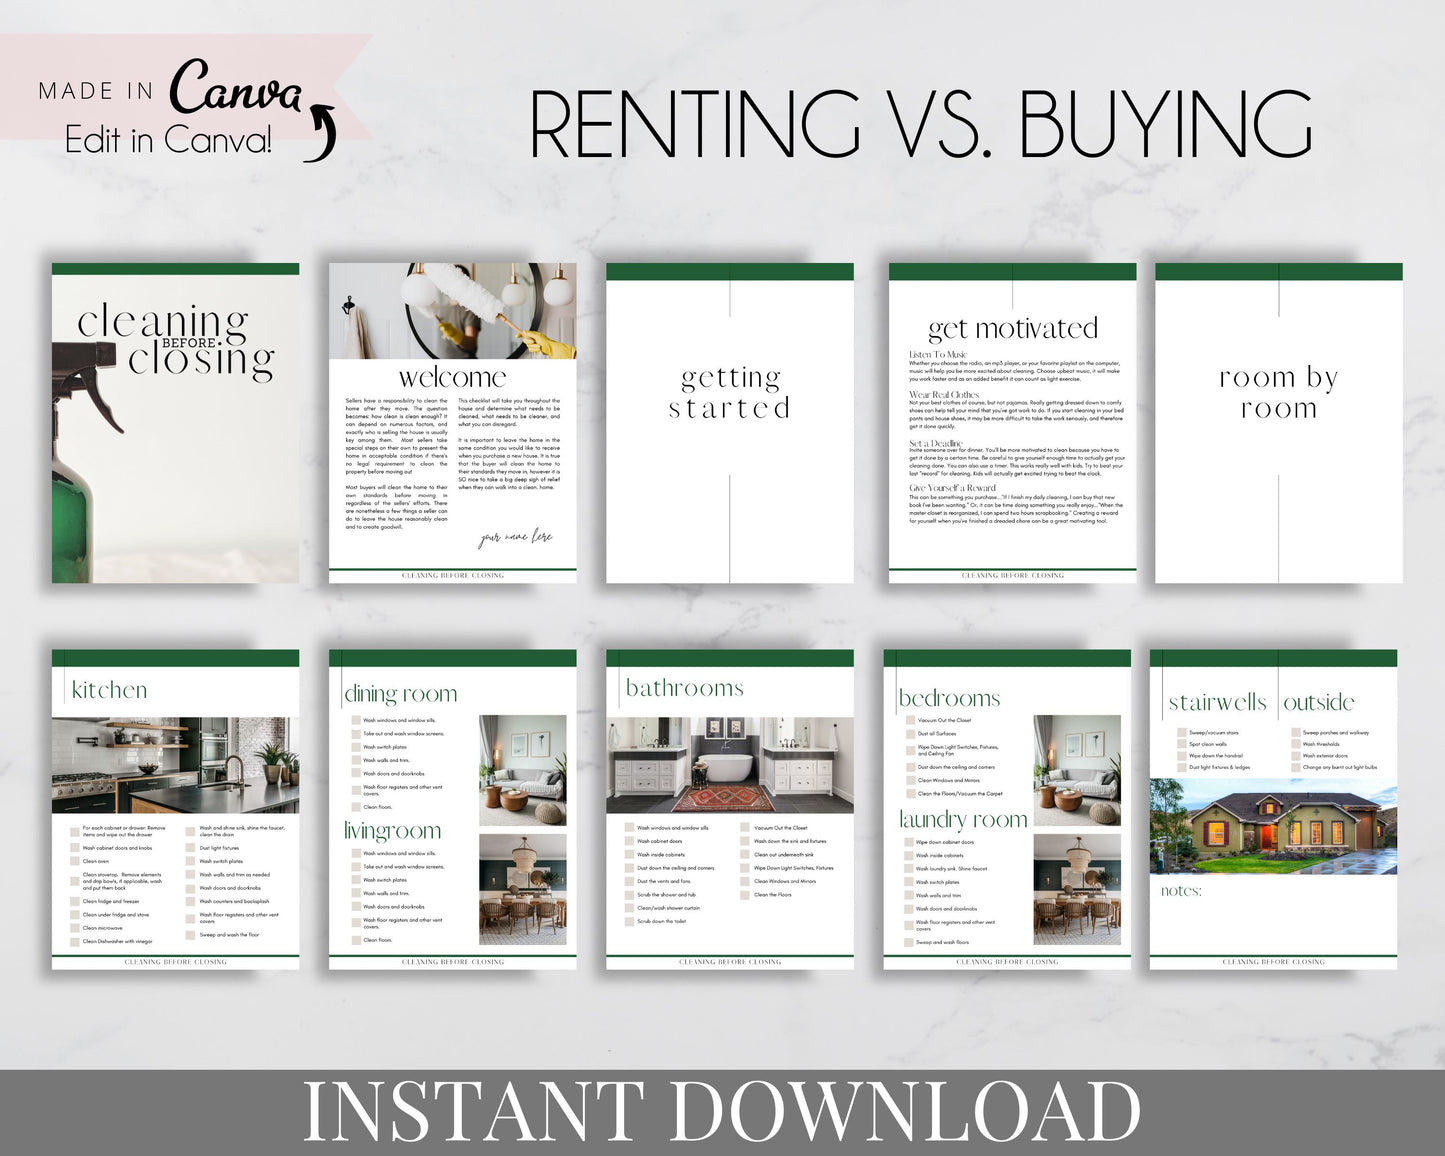 Cleaning Before Closing Instant Download for Real Estate Agents, Realtors to give Home Sellers - Renters vs. Buyers - Print or Digital - Made in Canva